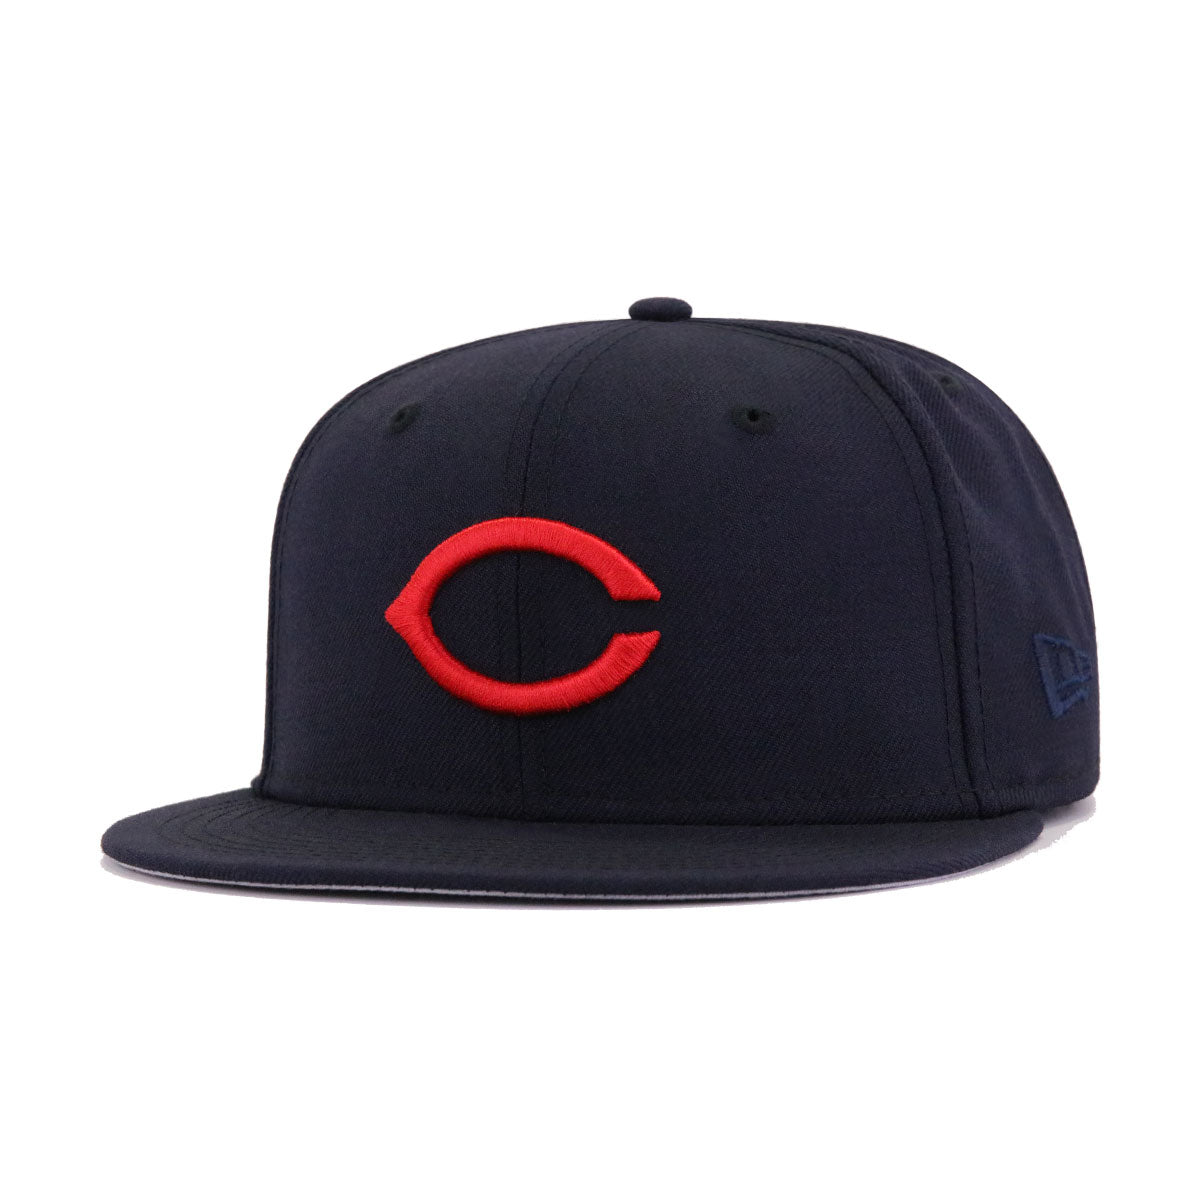 Cincinnati Baseball Hat Navy 1976 World Series New Era 59FIFTY Fitted Navy / Radiant Red / 8